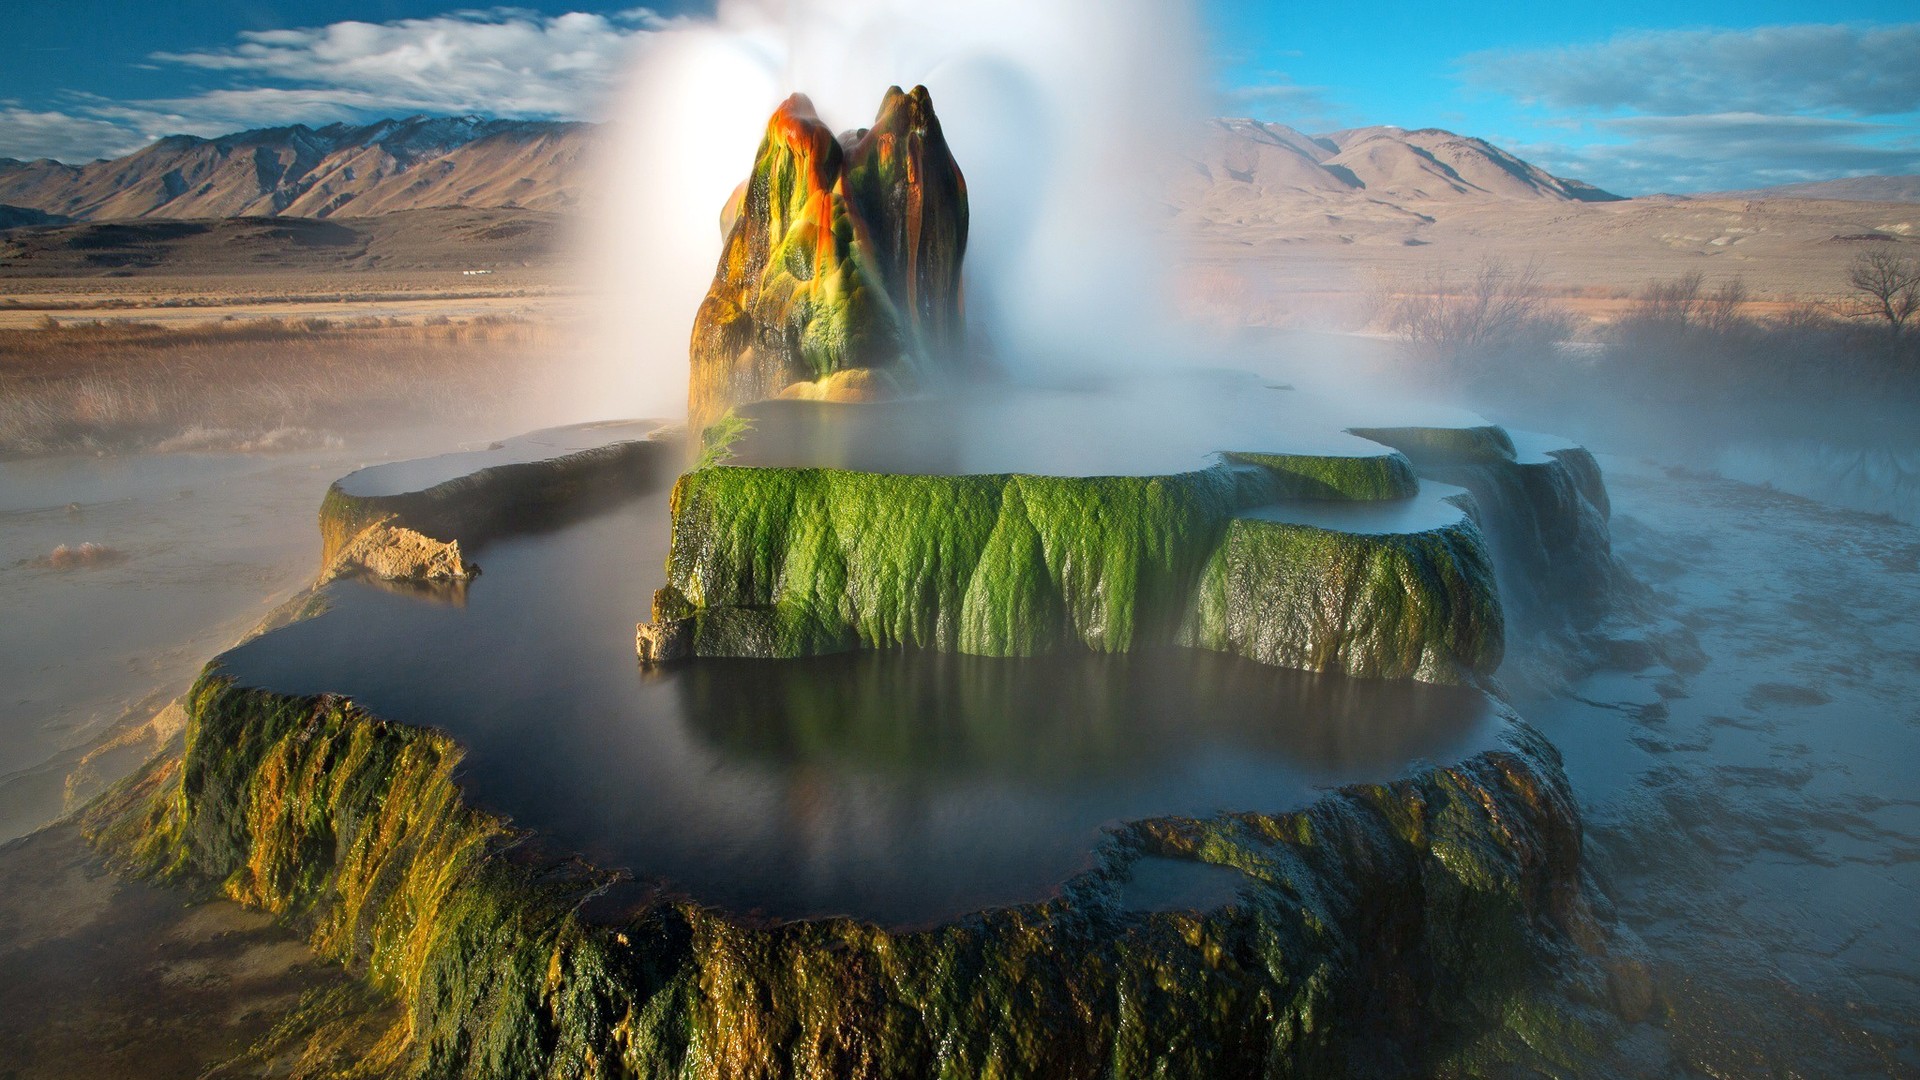 General 1920x1080 nature landscape mountains clouds Nevada USA water geysers long exposure reflection wet rocks